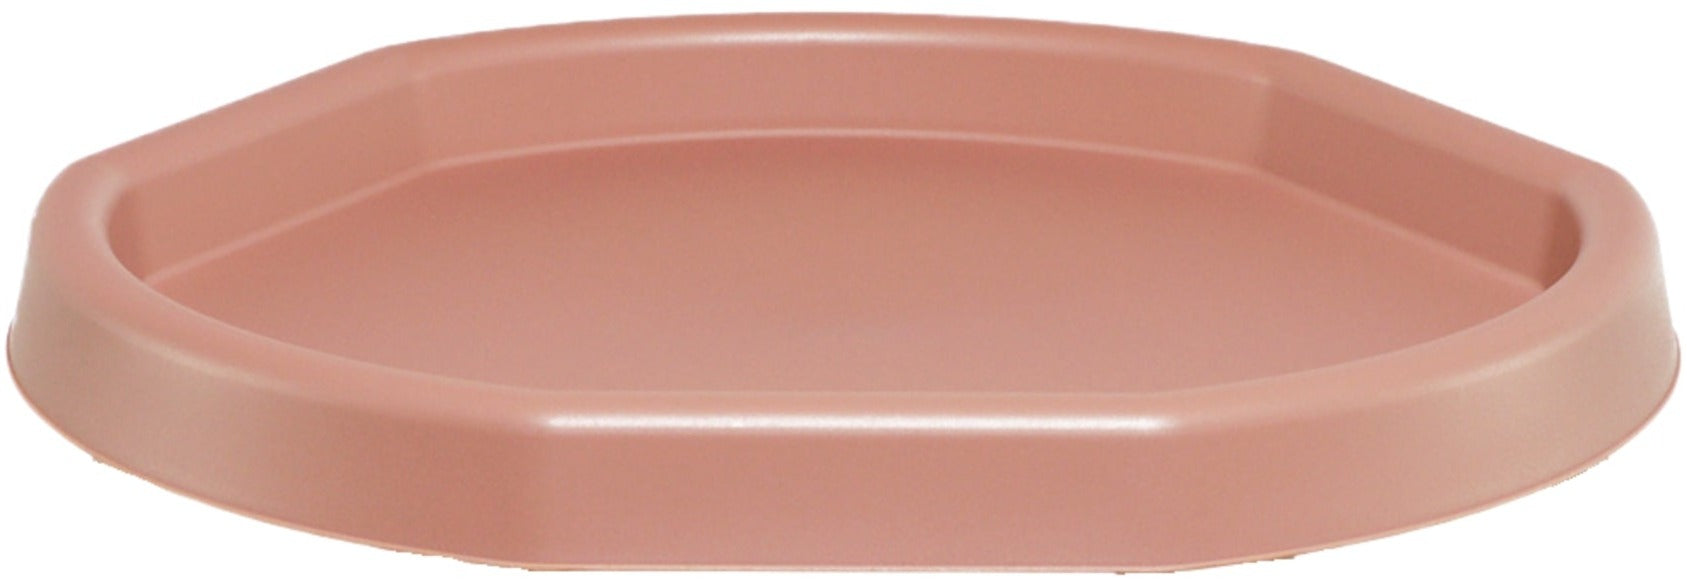 Hexacle Tuff Tray (73cm) - Coral Pink